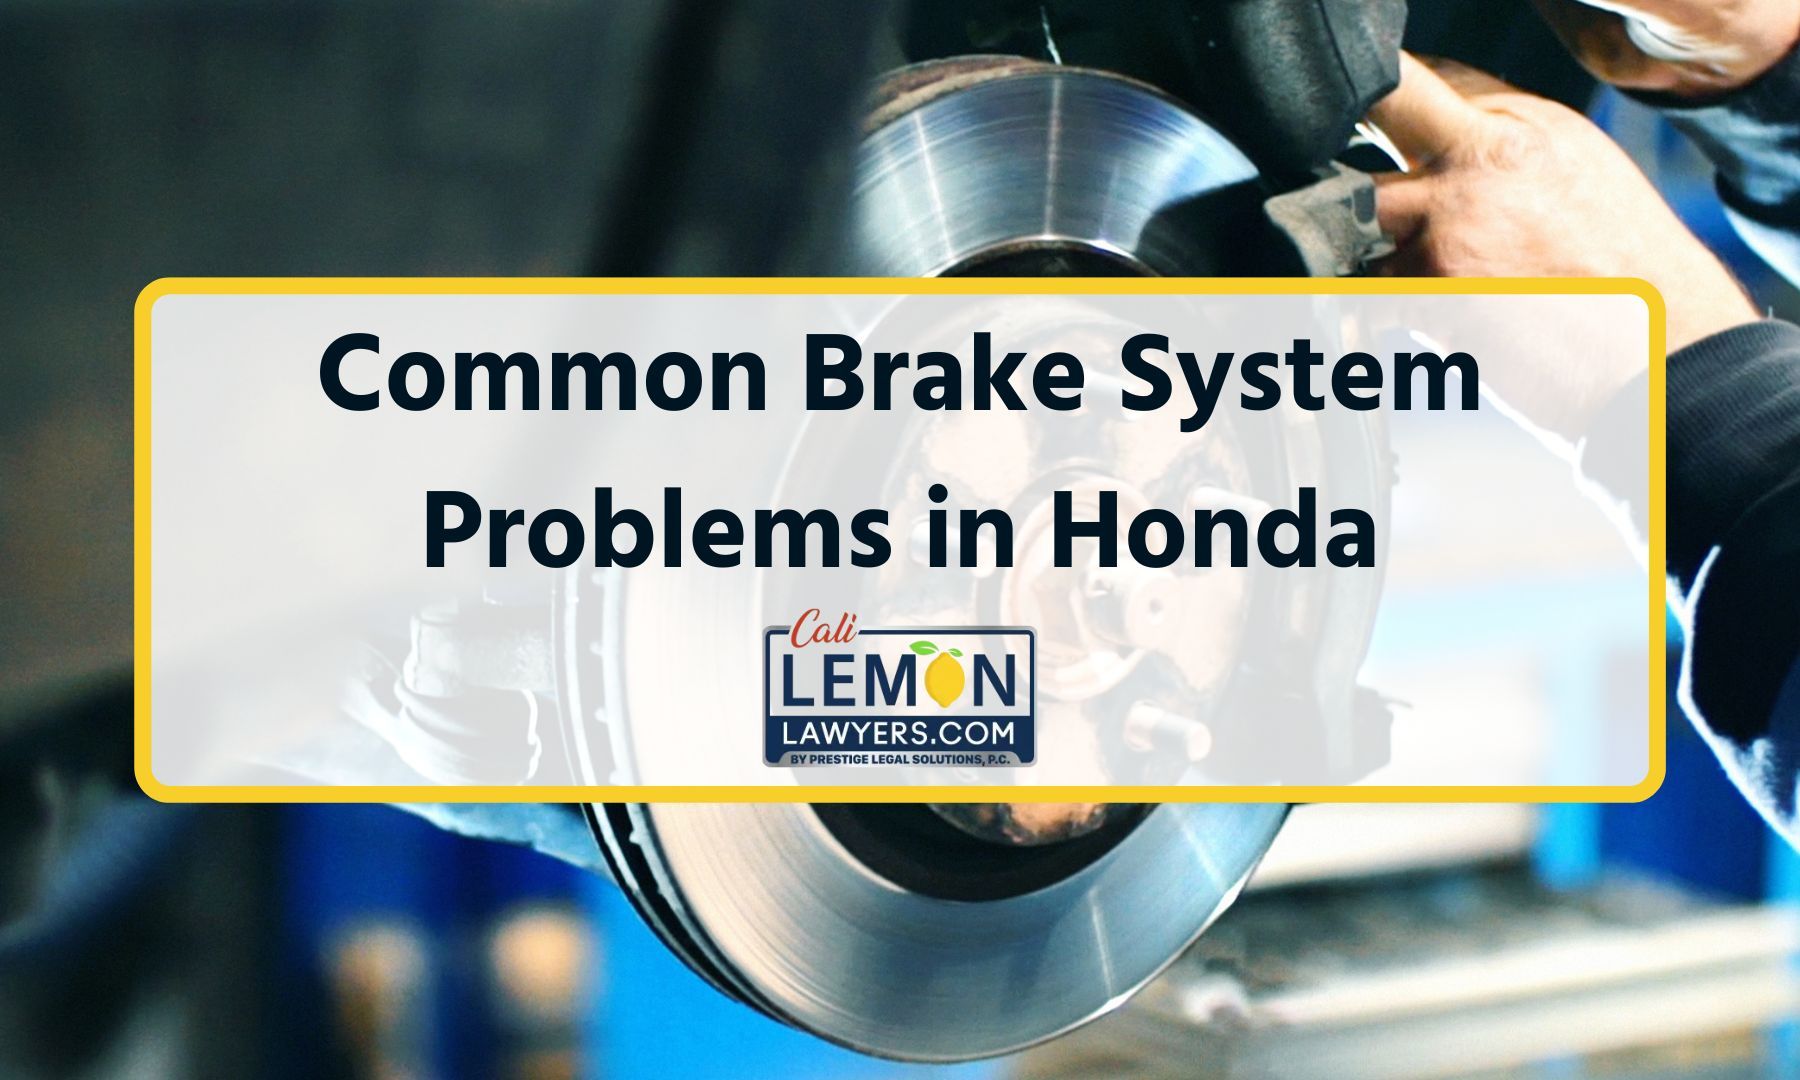 How to Solve Common Brake System Problems in Honda